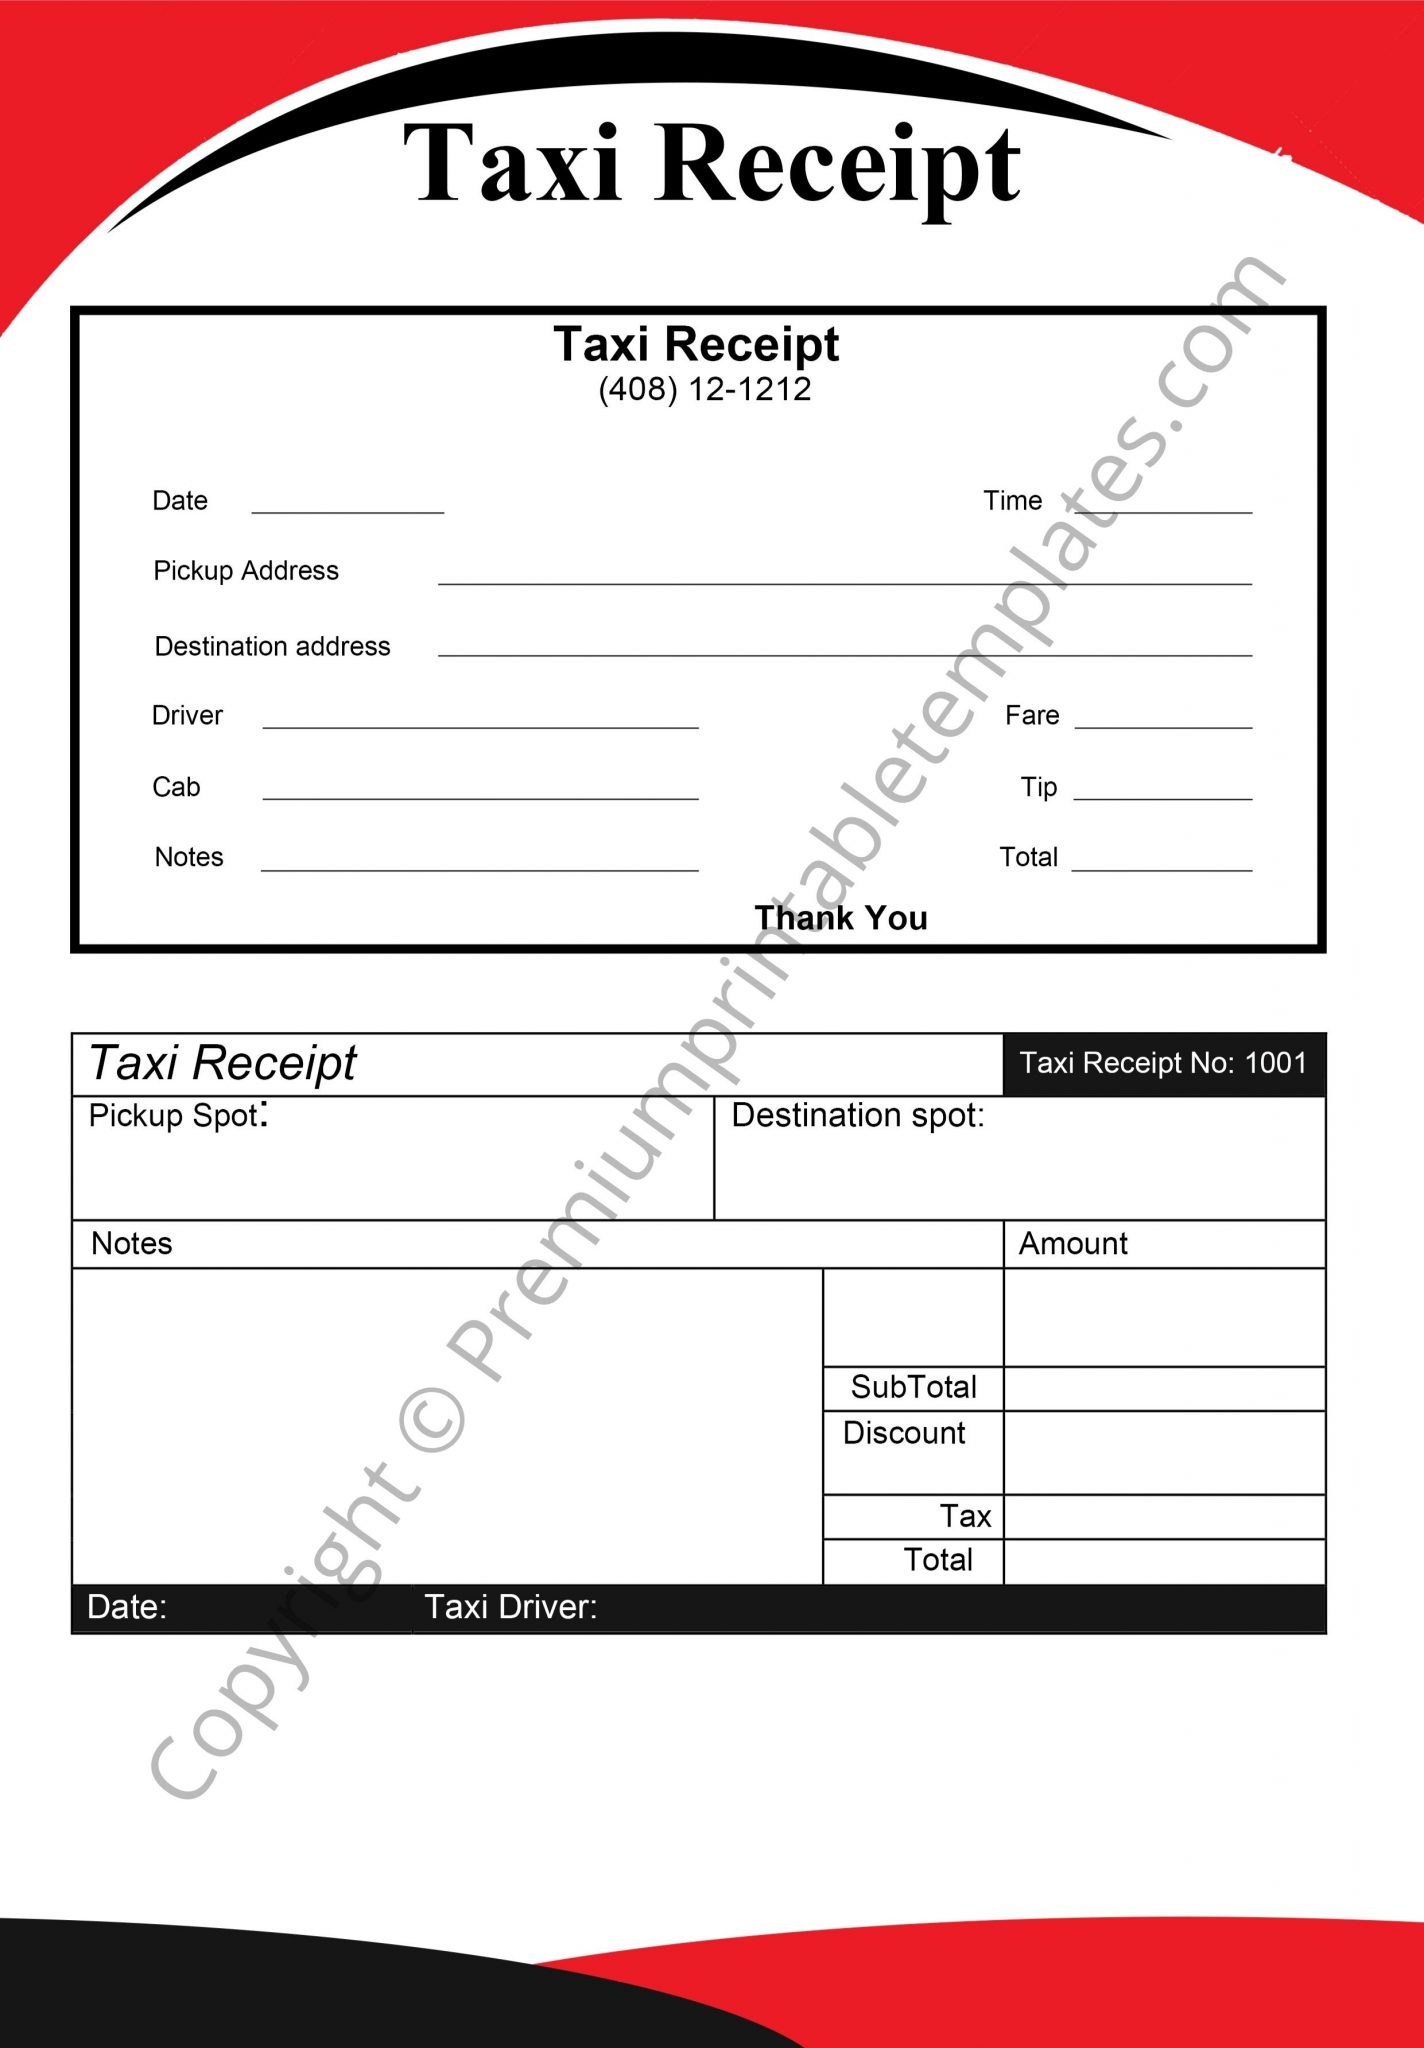 Taxi Receipt Printable Template In Pdf And Word Pack Of 5 6261